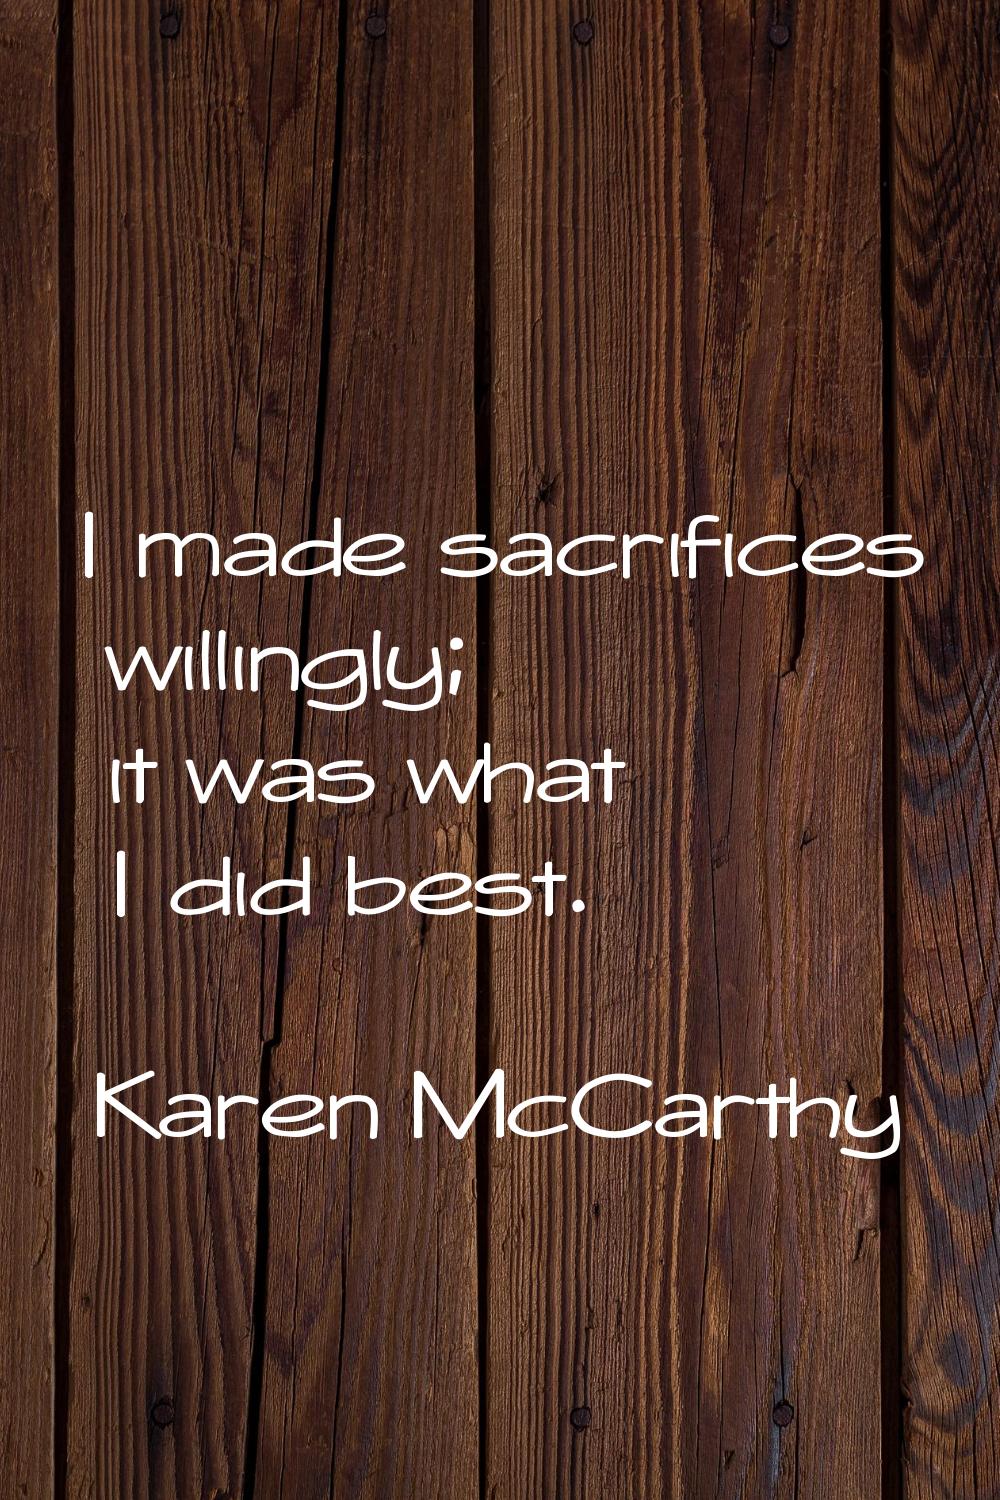 I made sacrifices willingly; it was what I did best.